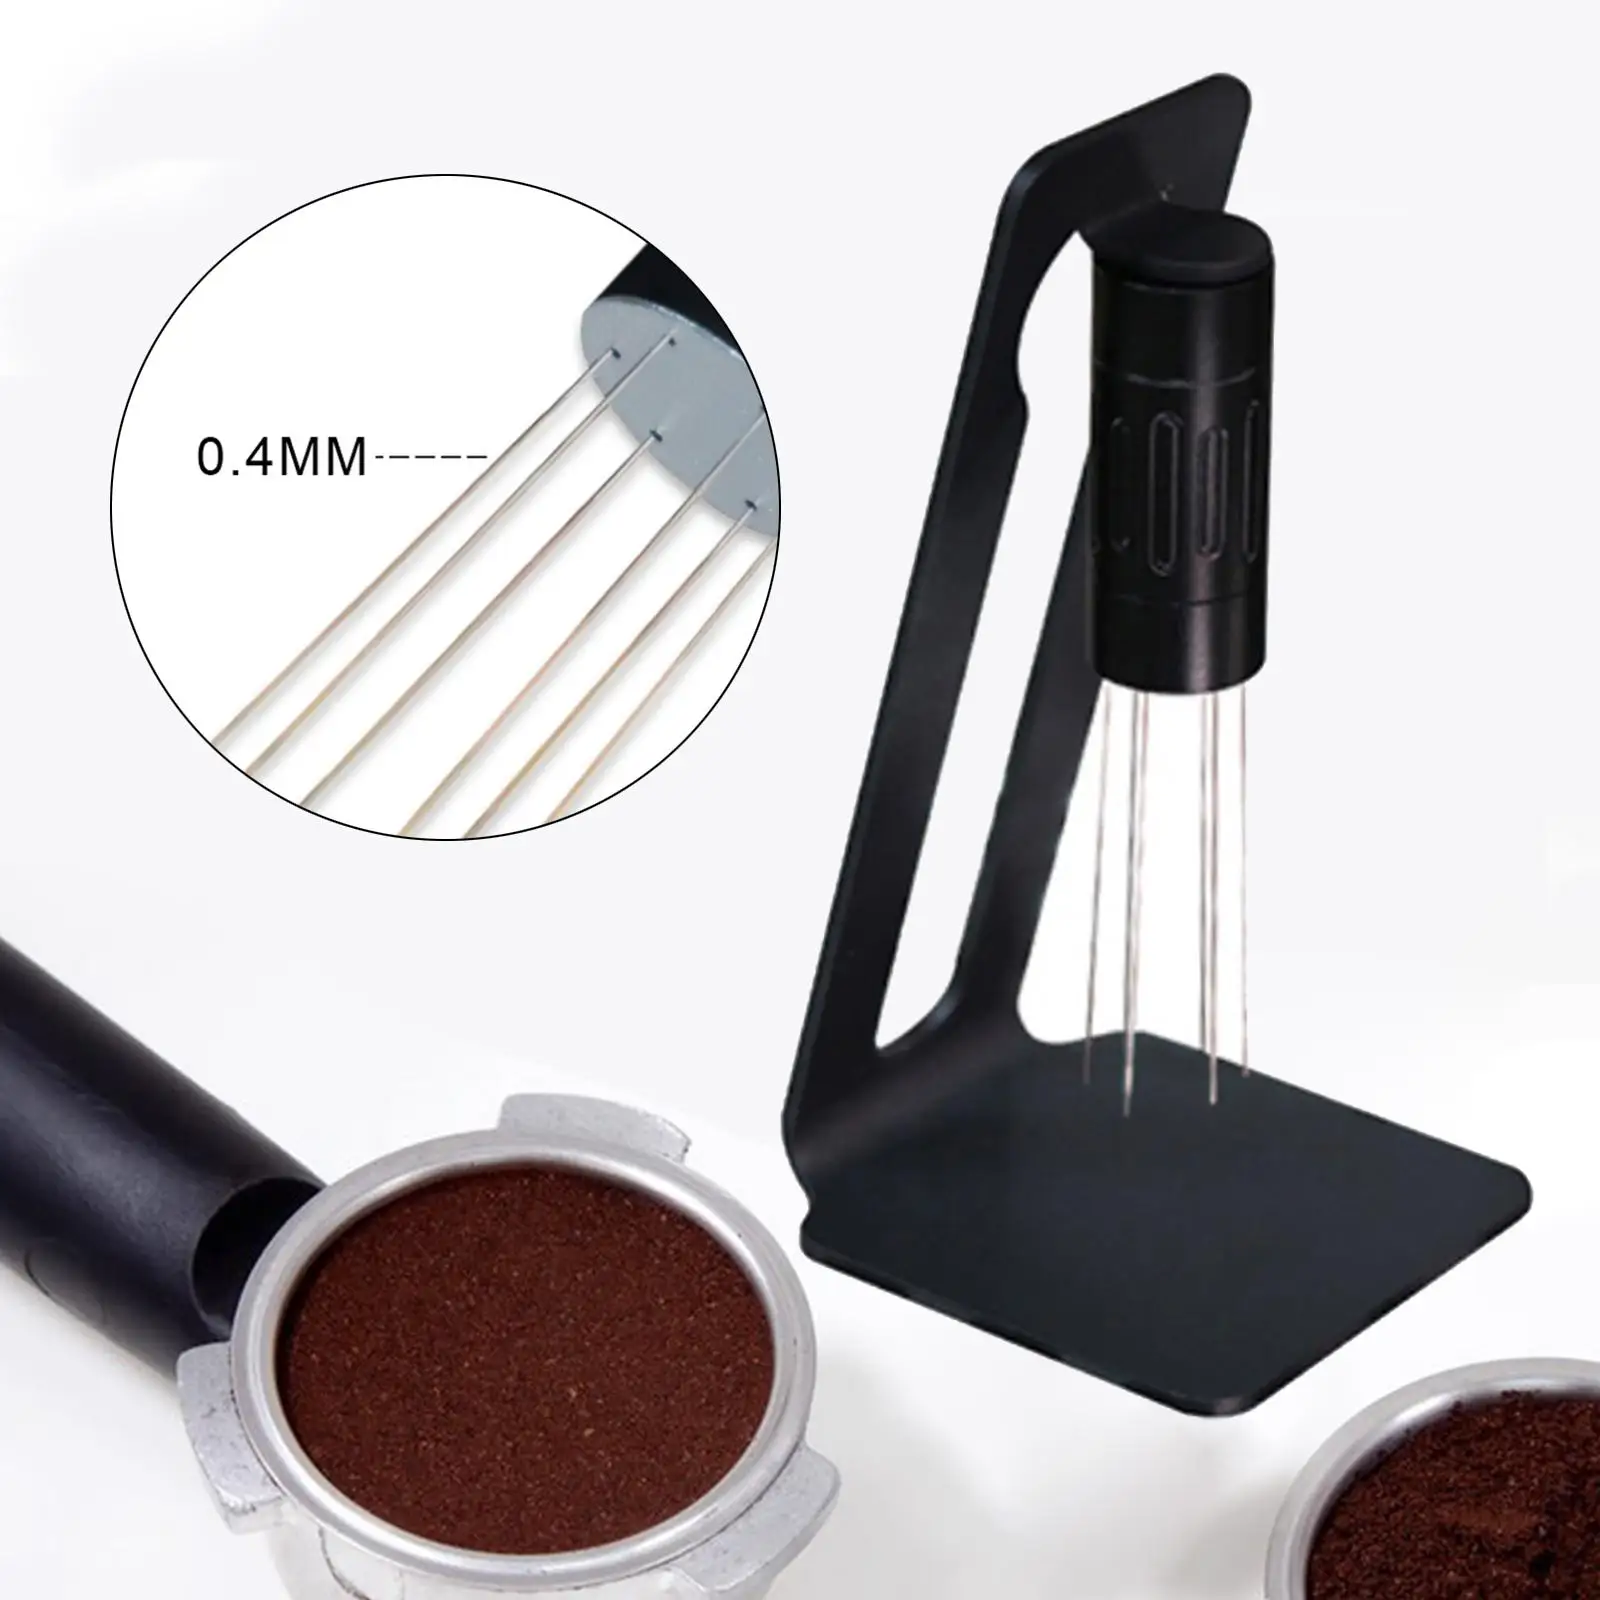 Espresso Stirrer Practical Coffee Pin Dispenser 6 Pins Coffee Ground Needle Distributor for Espresso Accessories Home Daily Use